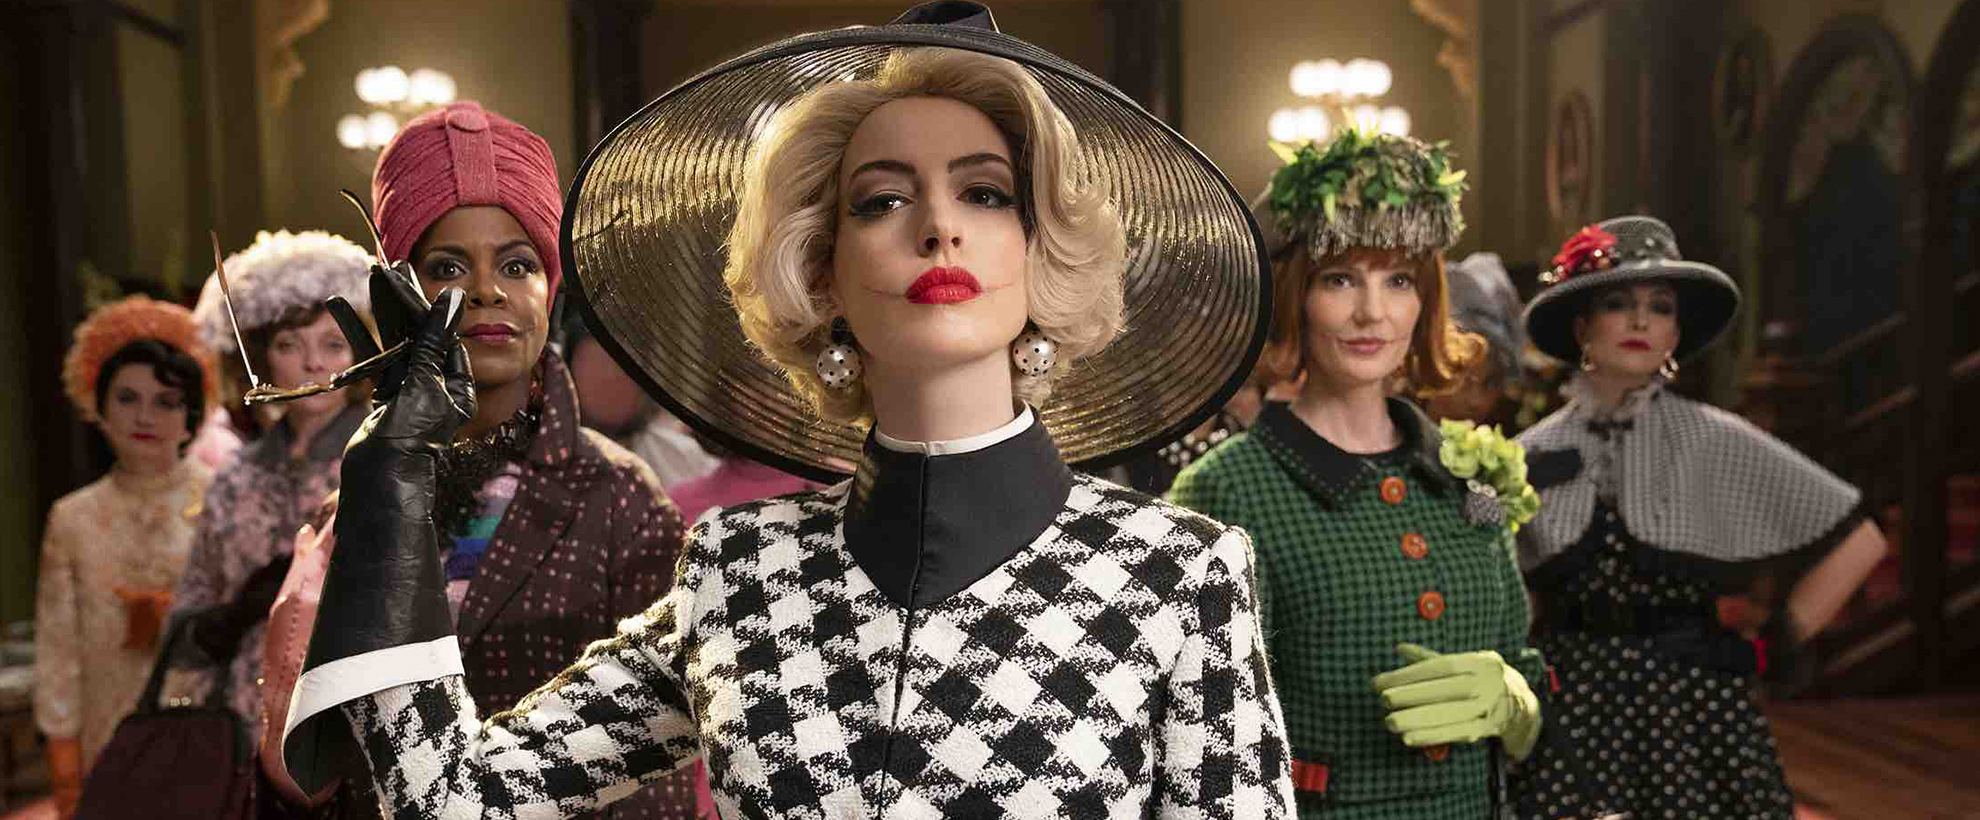 Anne Hathaway in a black and white houndstooth suit, leads the ensemble cast of The Witches